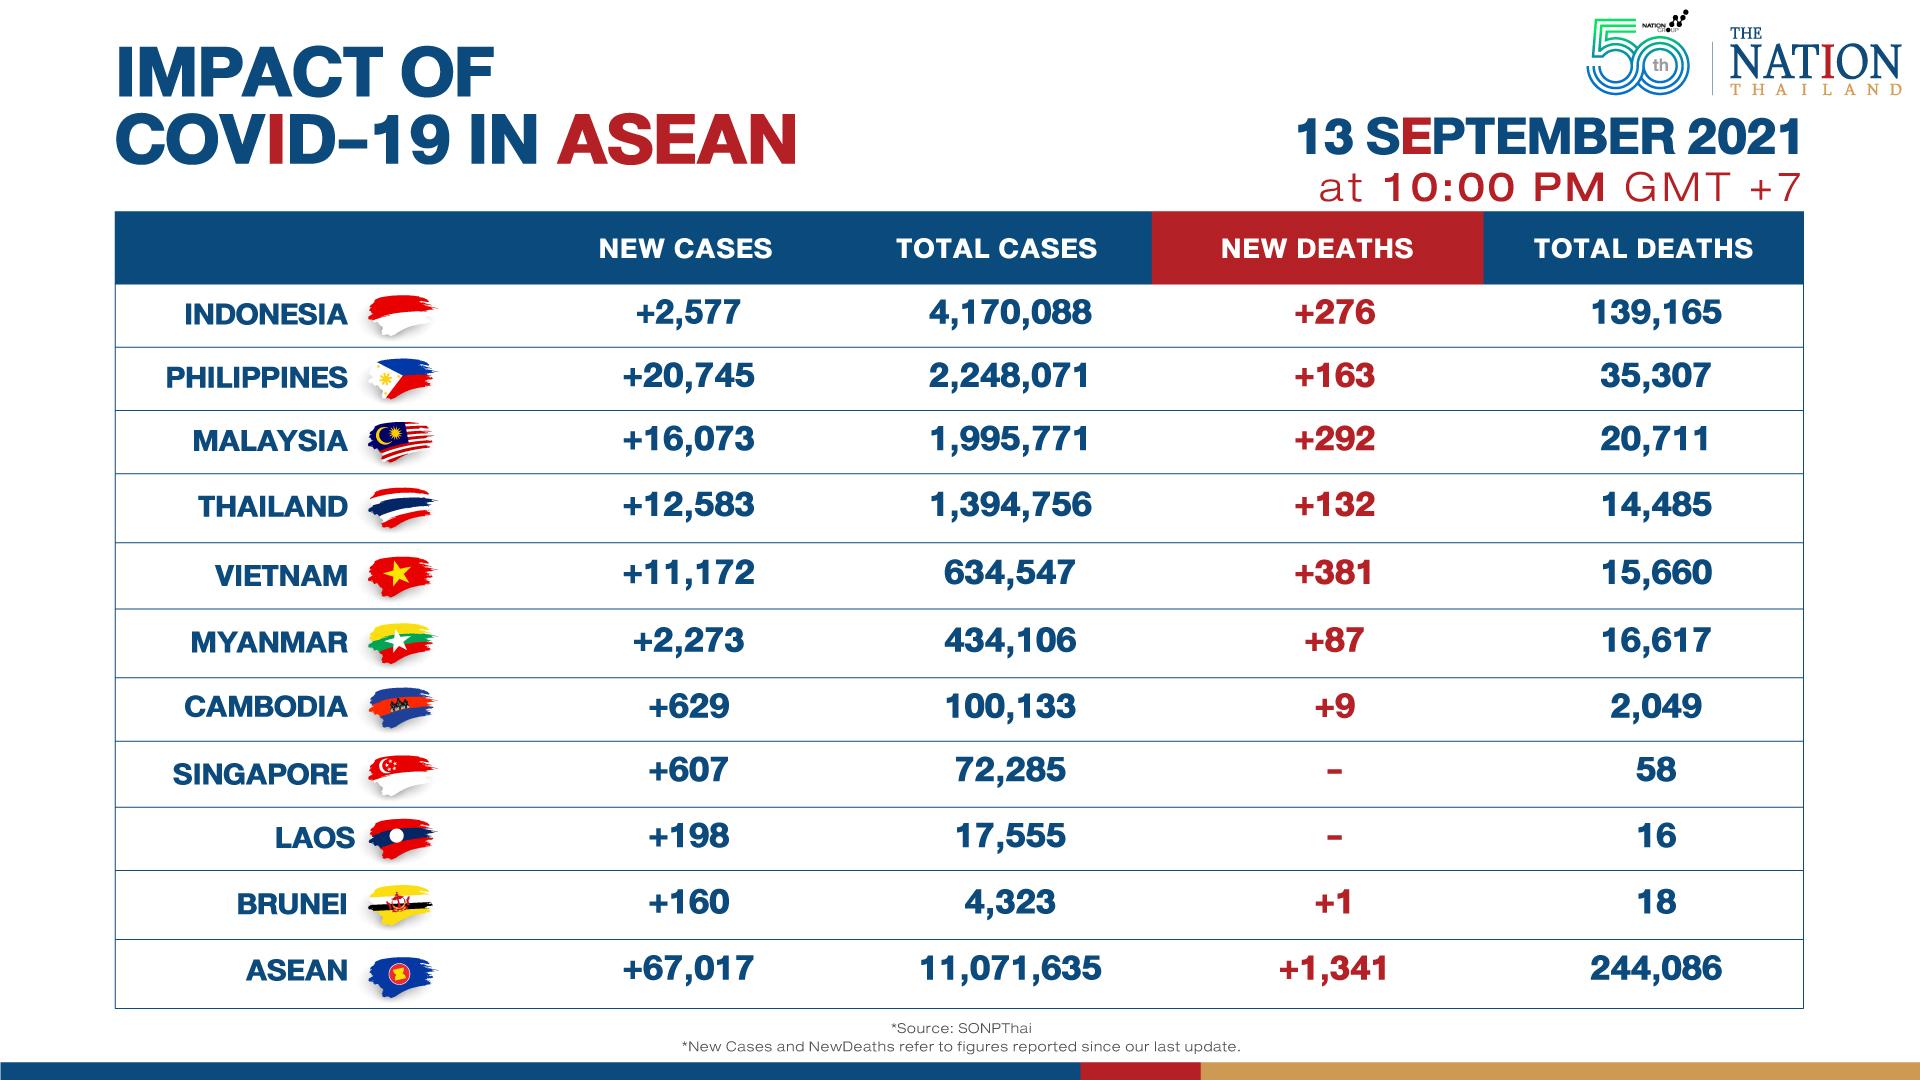 New Covid-19 cases and deaths down in Asean